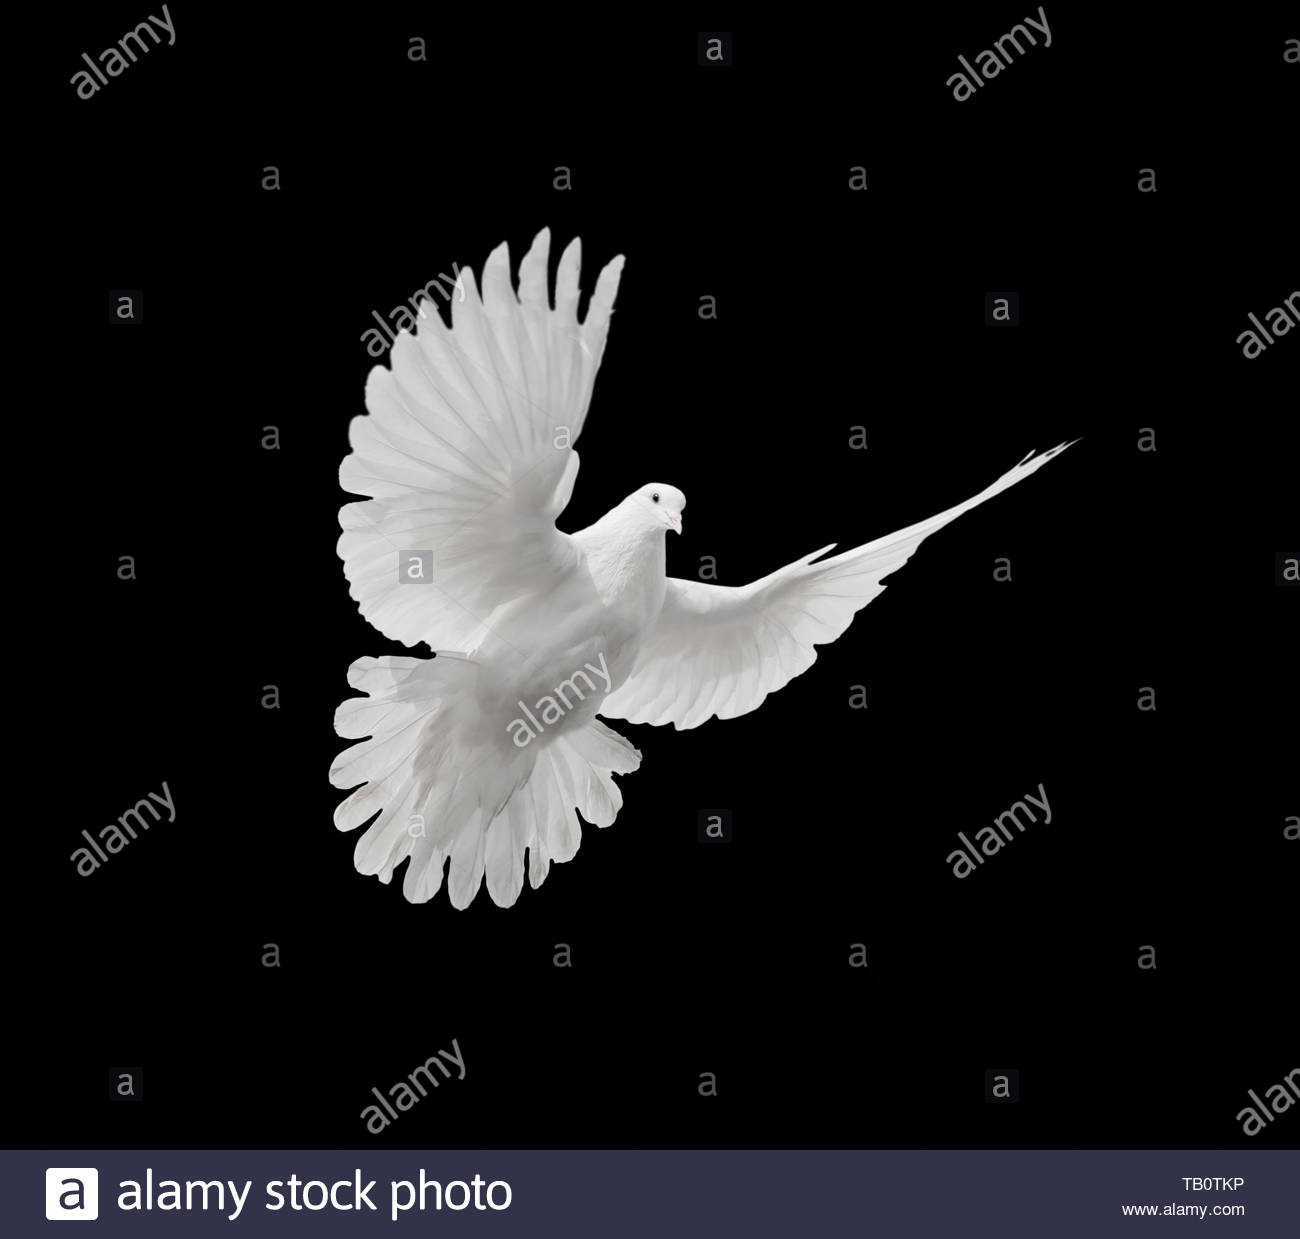 Flying White Dove Isolated On A Black Background Stock Photo